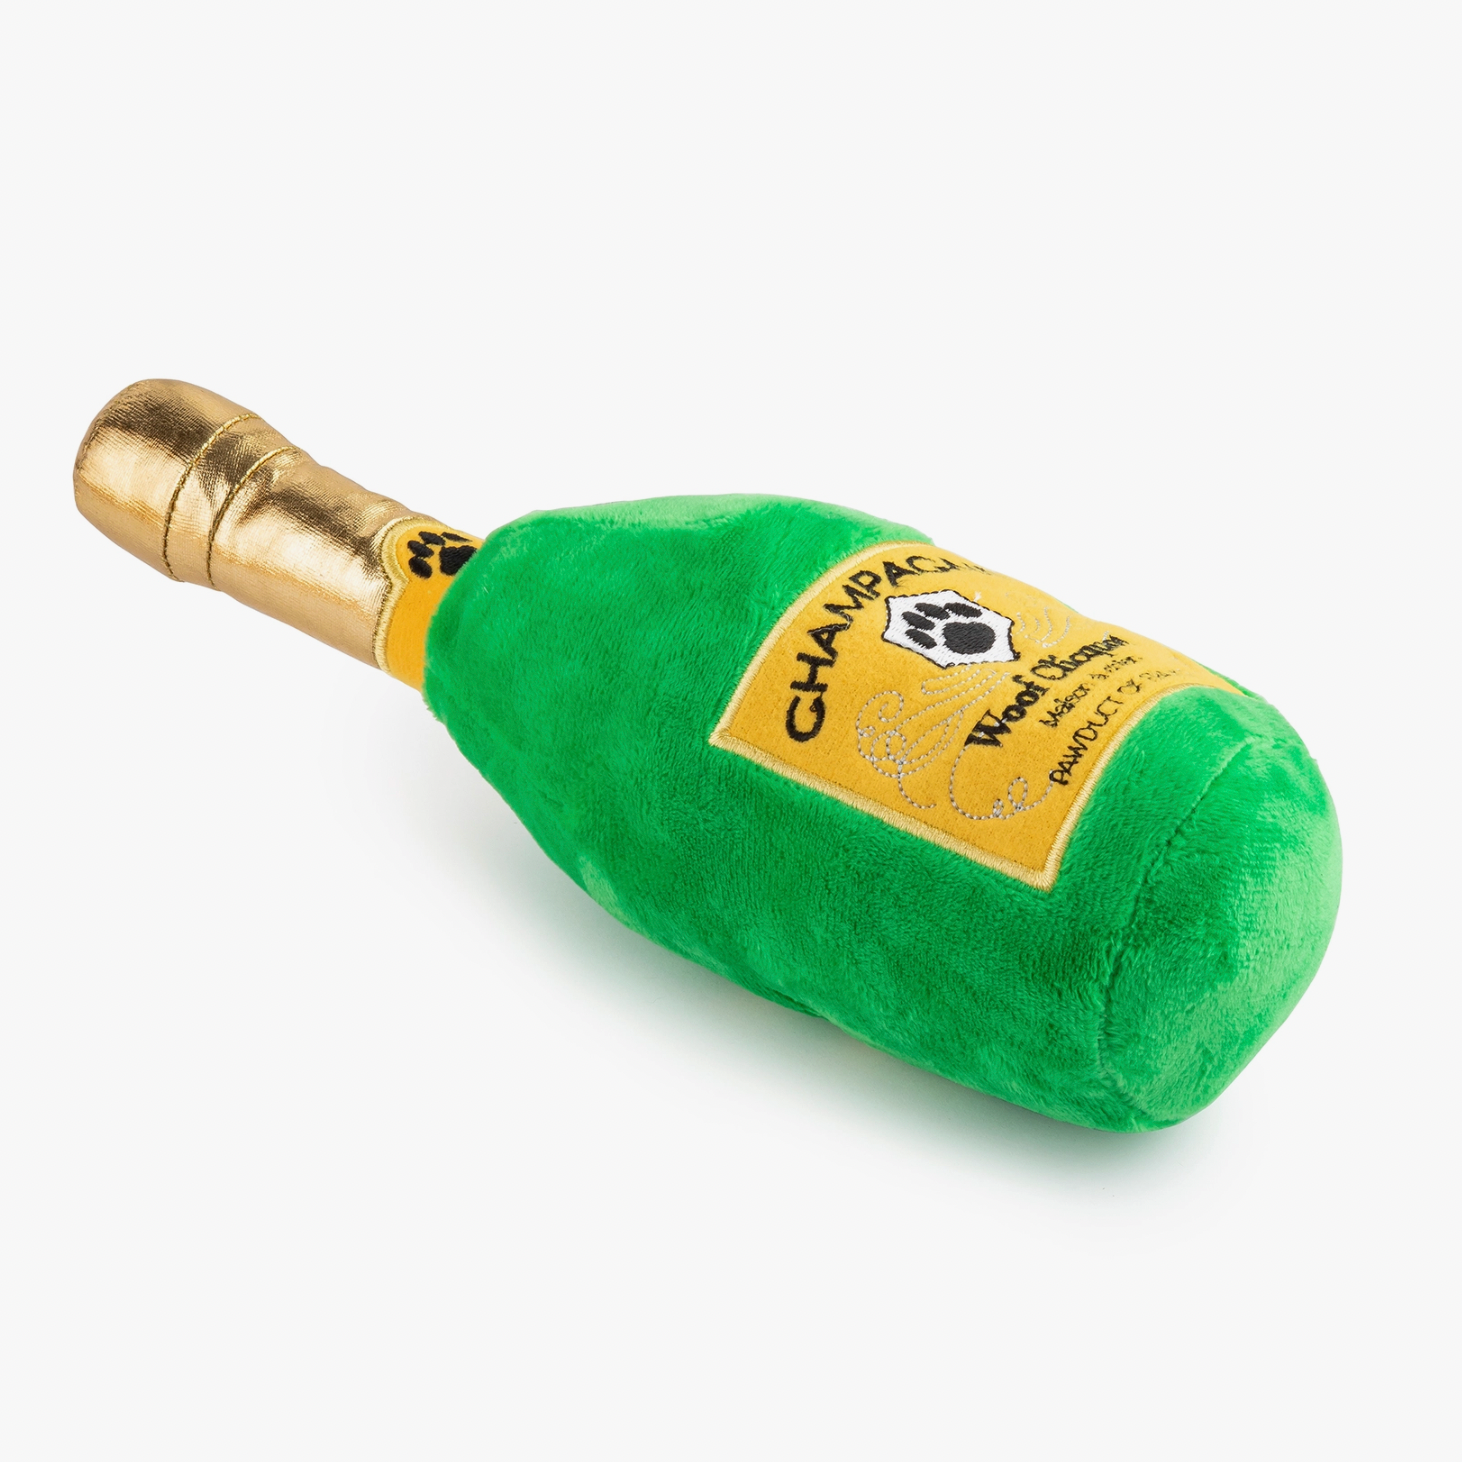 Woof Clicquot Dog Toy